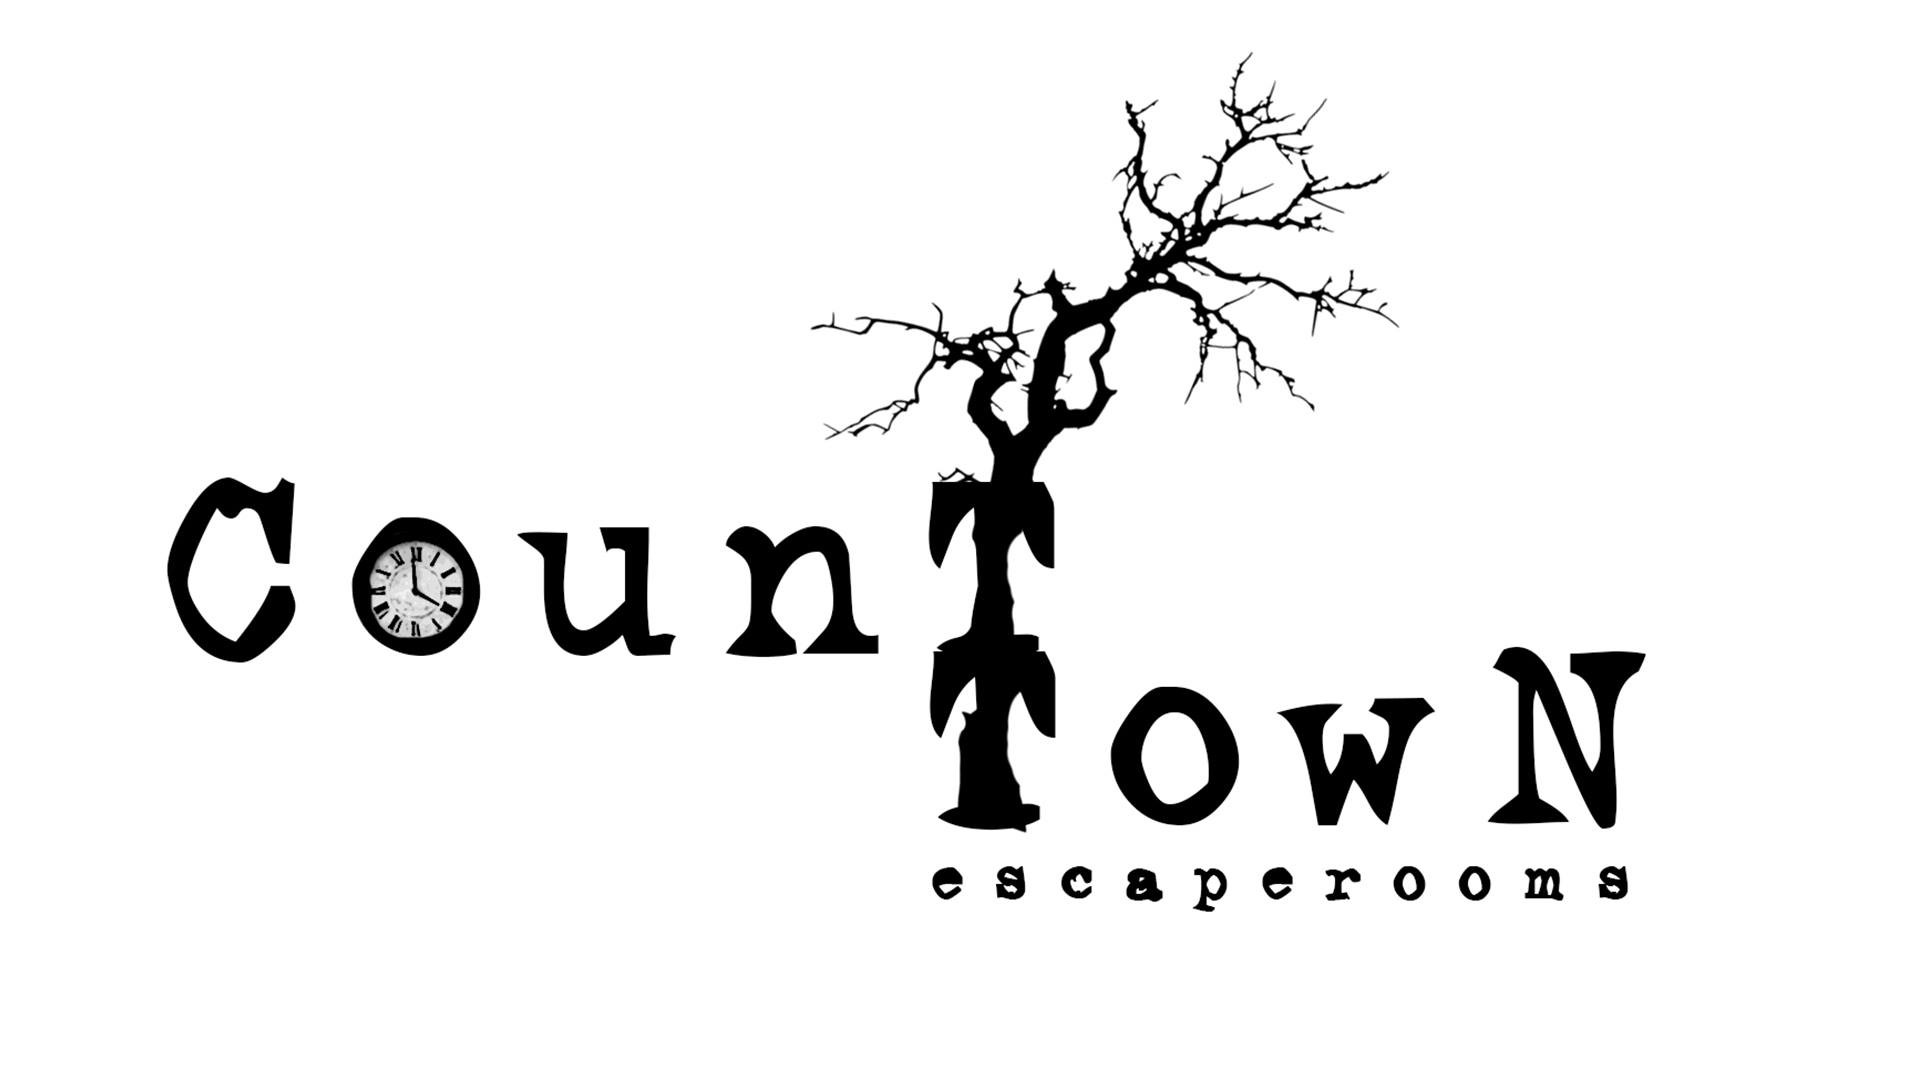 Count Town